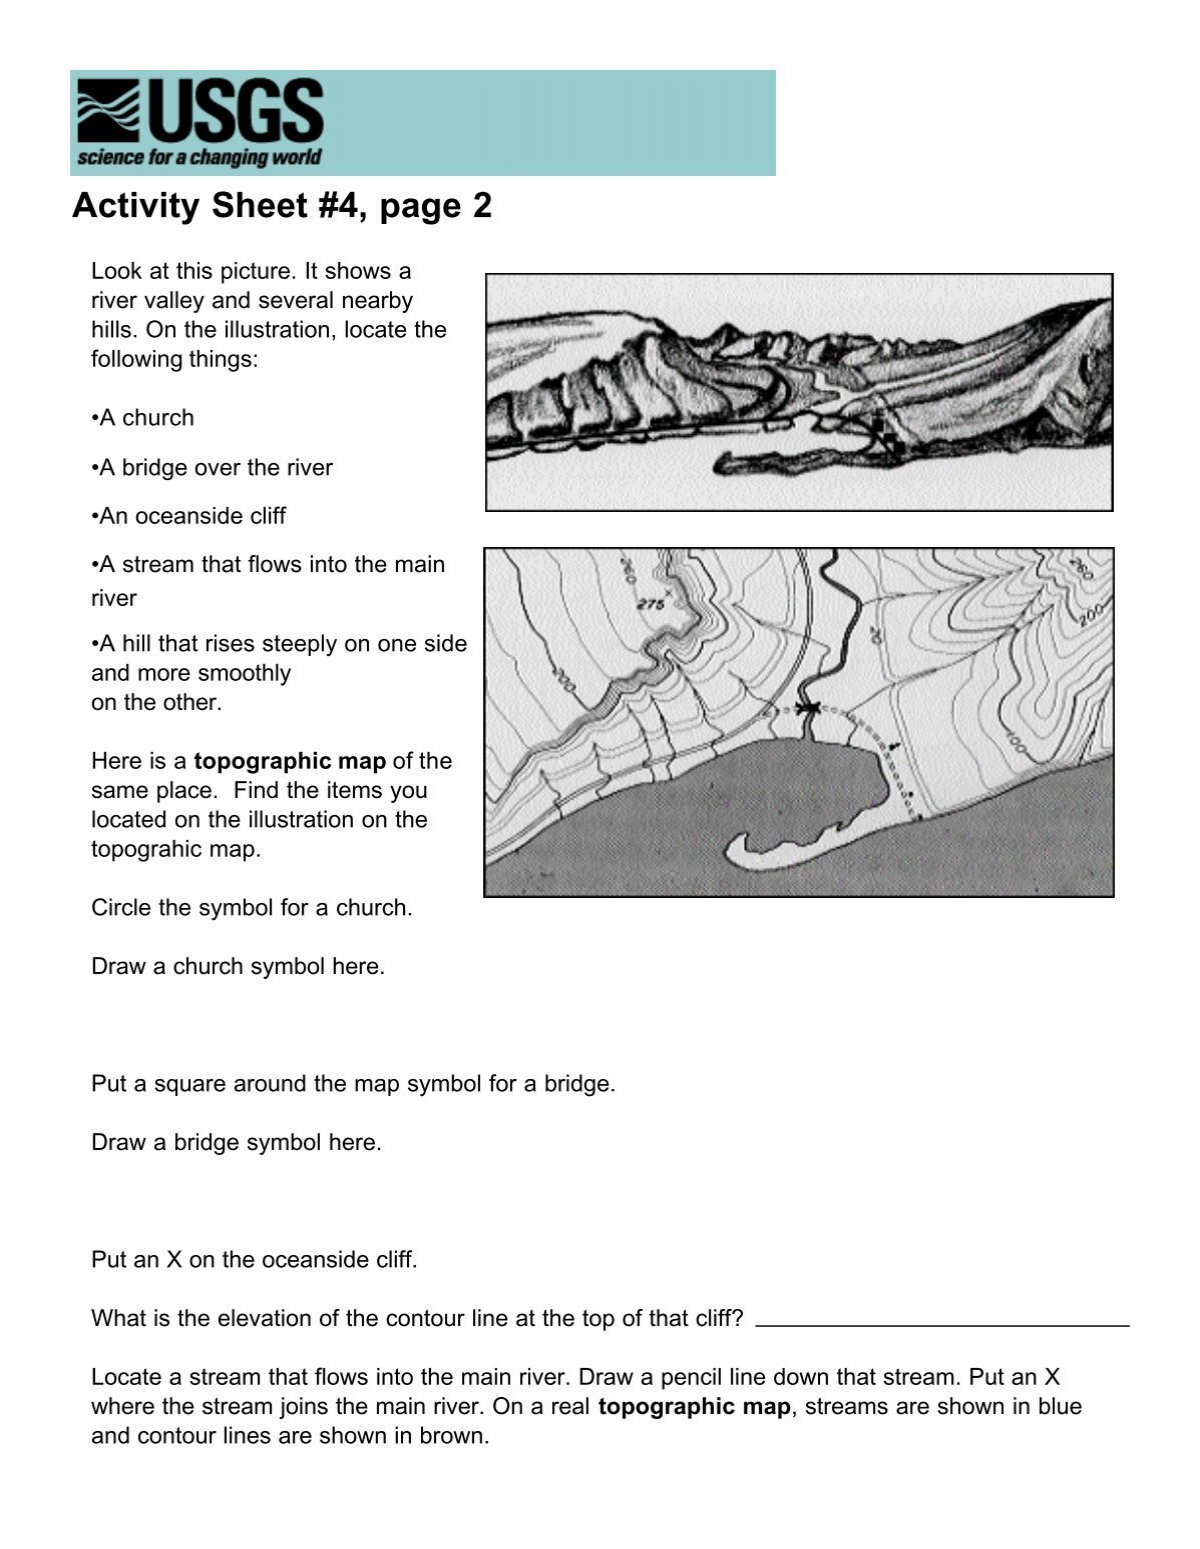 Activity Sheet #4, page 2